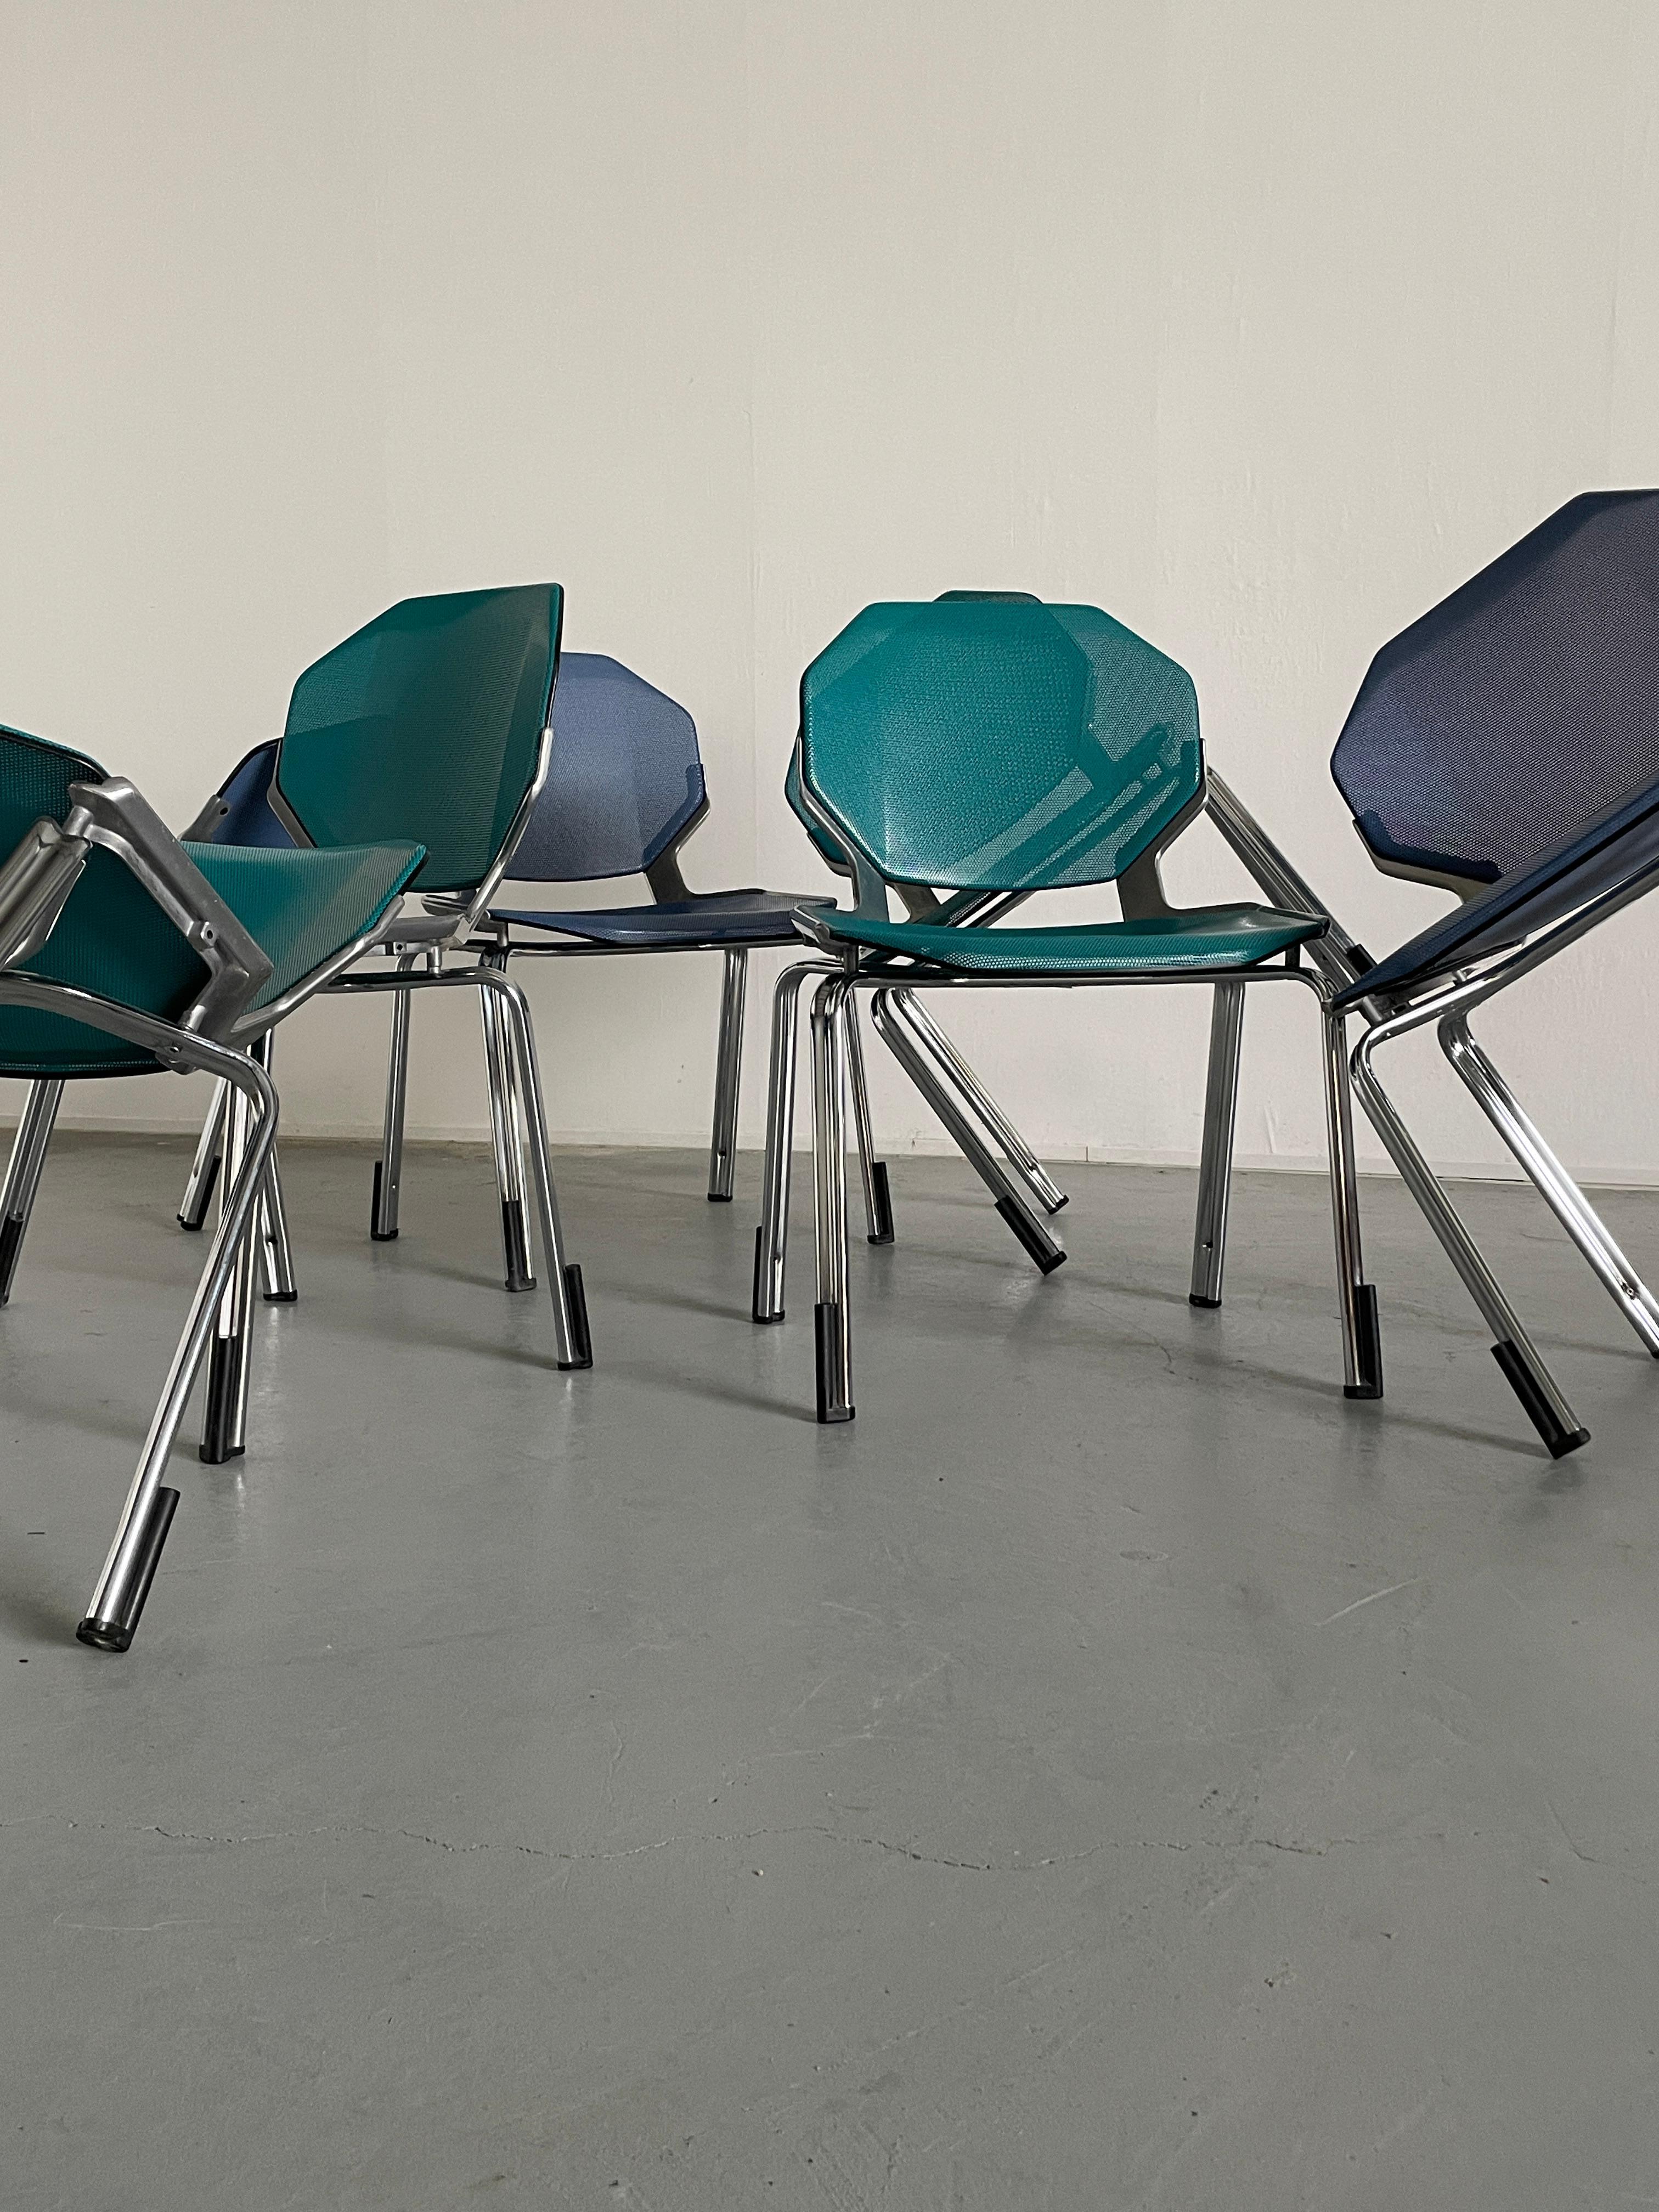 Space Age Futuristic Octagonal Stackable Dining Chairs by Fröscher Sitform, 90s For Sale 8